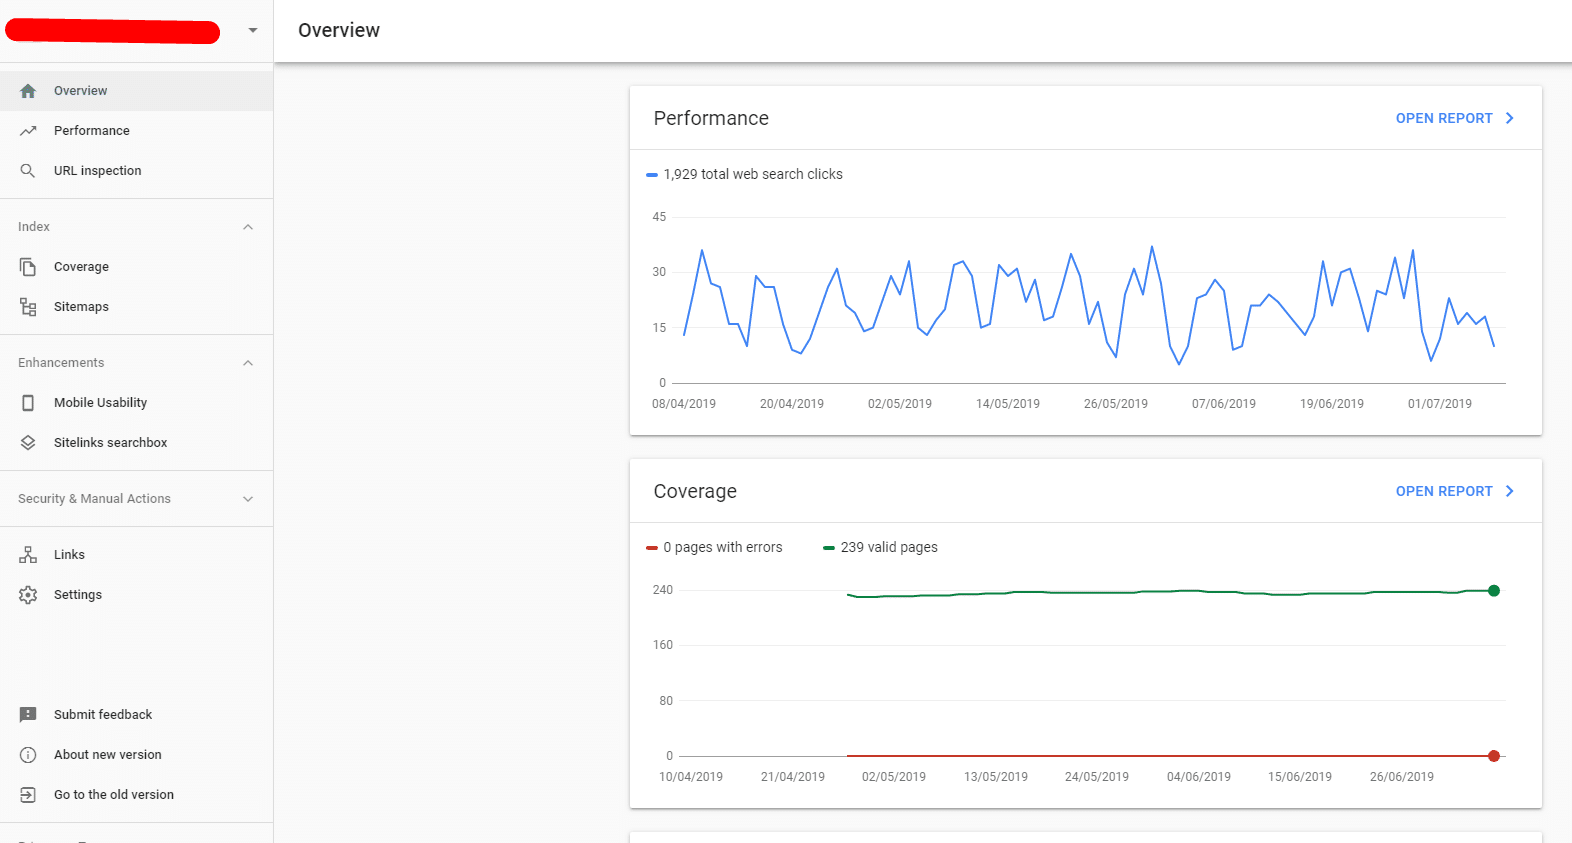 Website Performance and Coverage Overview